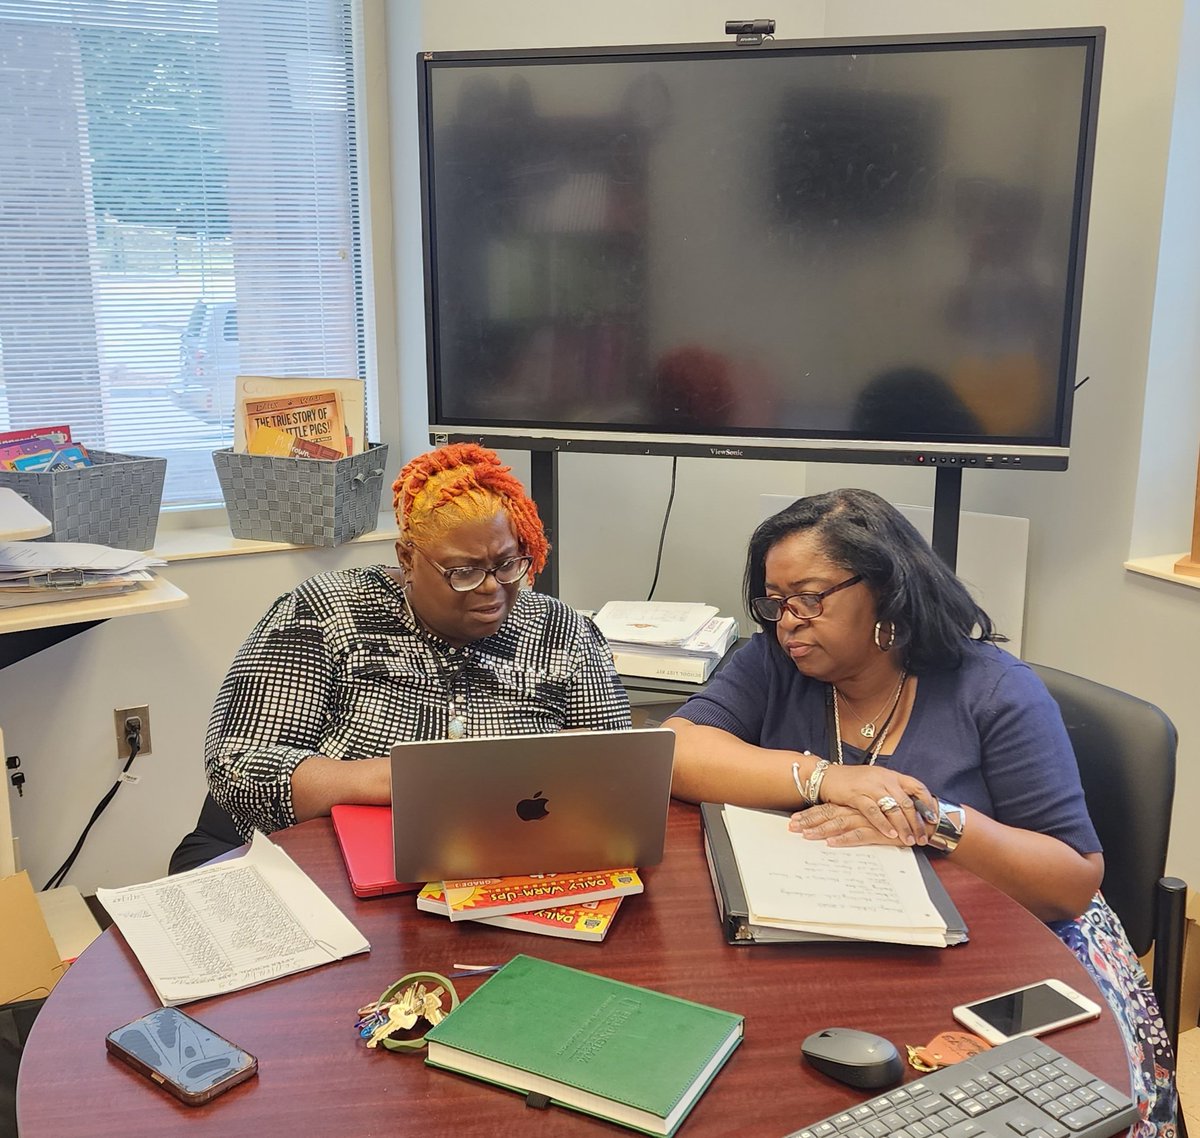 Oliver's ARI Coach and ESSR Coach planning to chart our students lowest deficit in reading during our next PLC meeting.  
#progressmonitoring
#oneteamonedream💛💚
#inchbyinchwearemoving